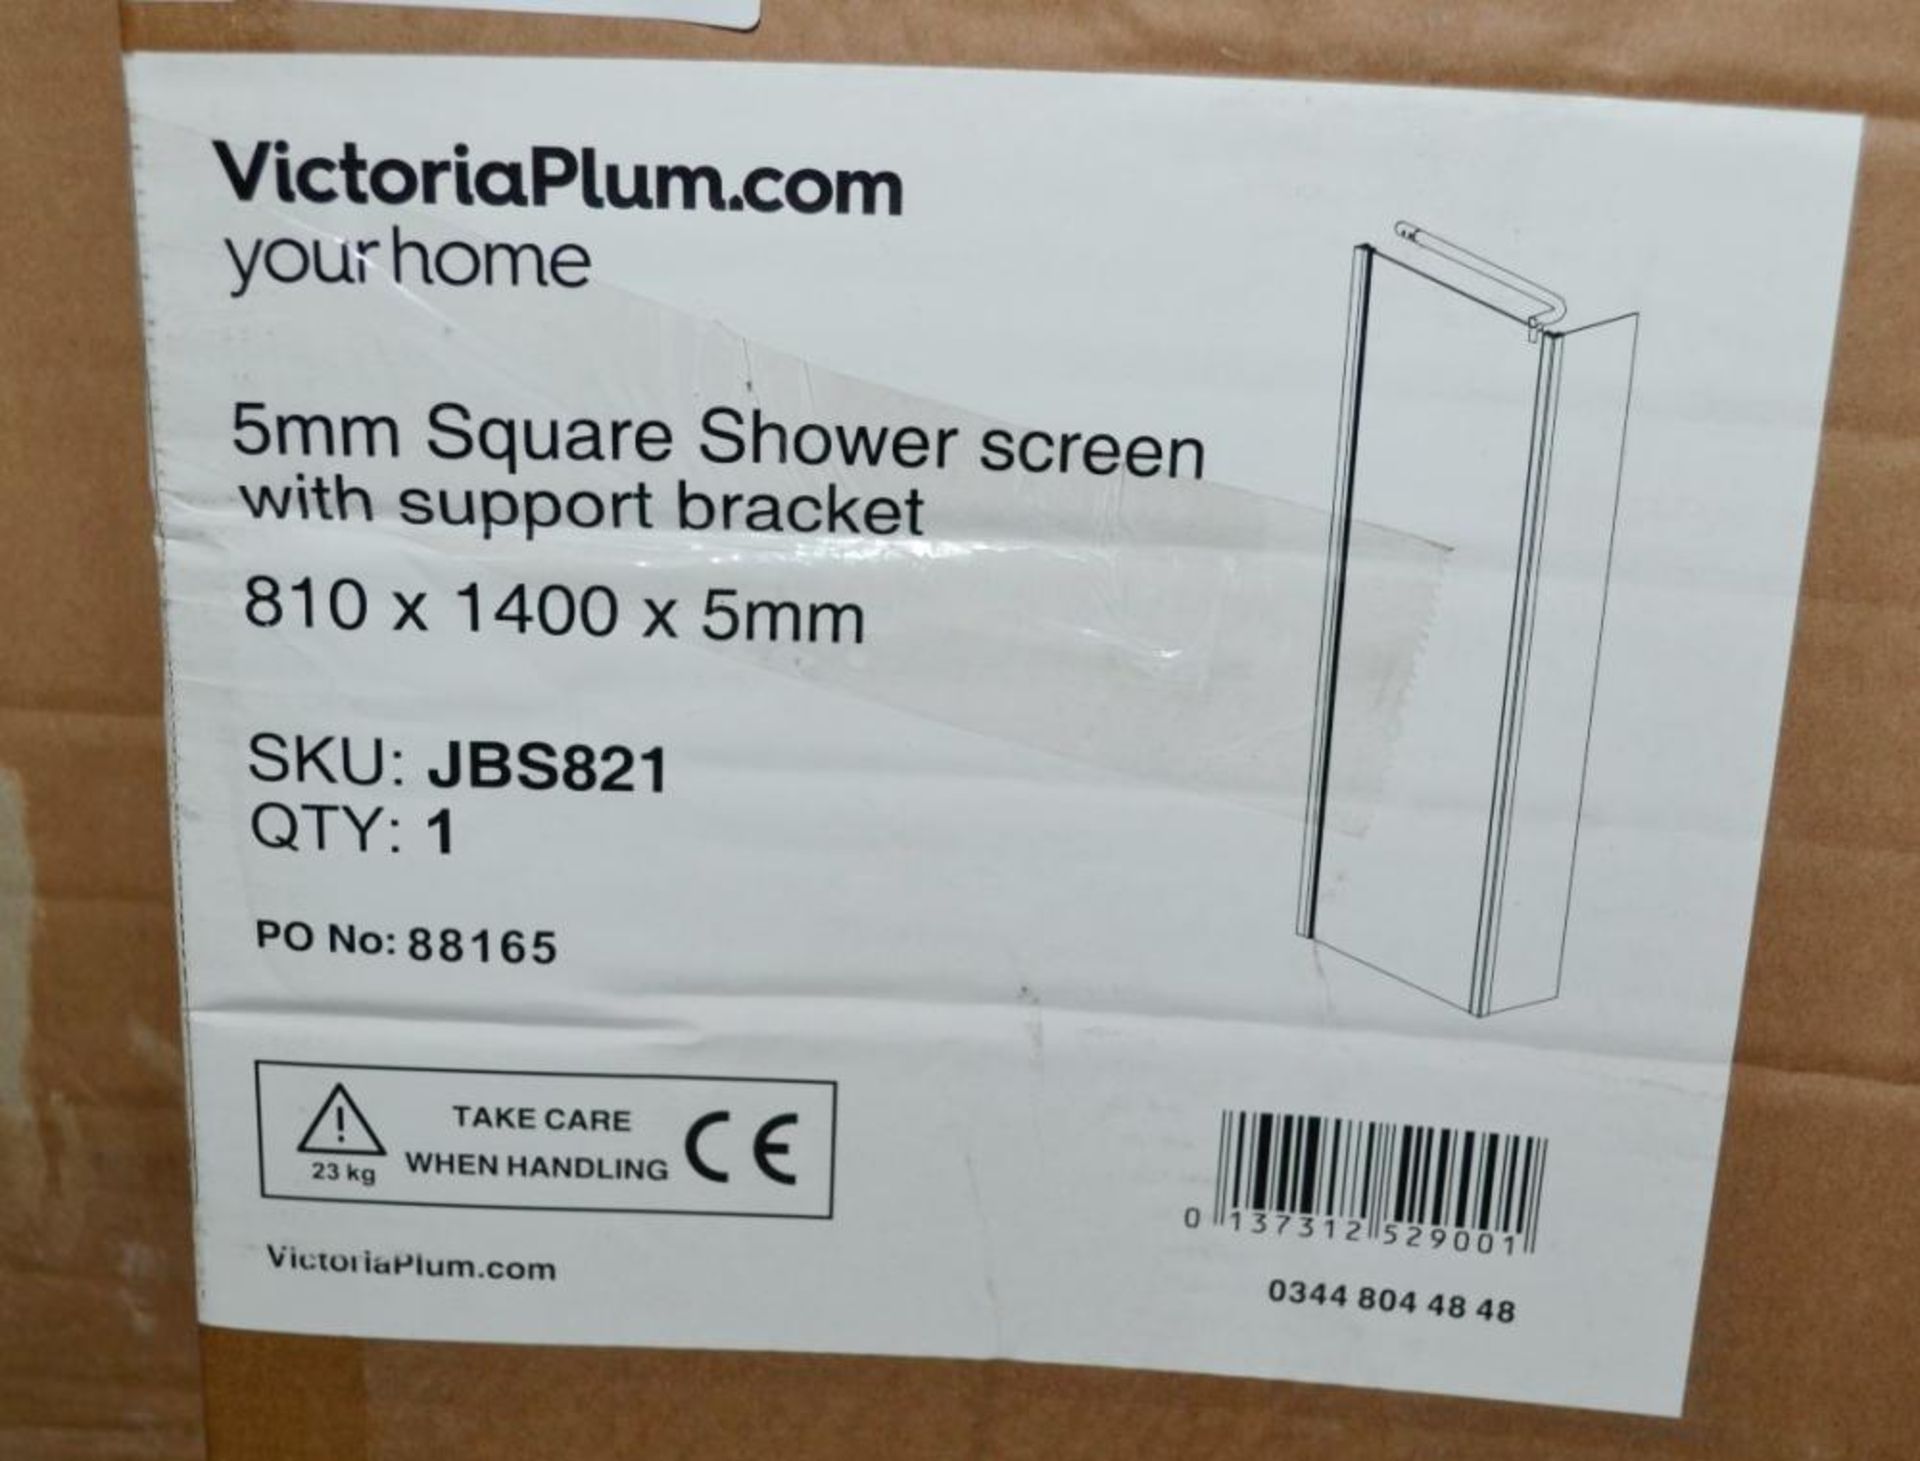 1 x 5mm Square Shower Screen With Support Bracket (JBS821) - New / Unused Stock - Dimensions: 810 x